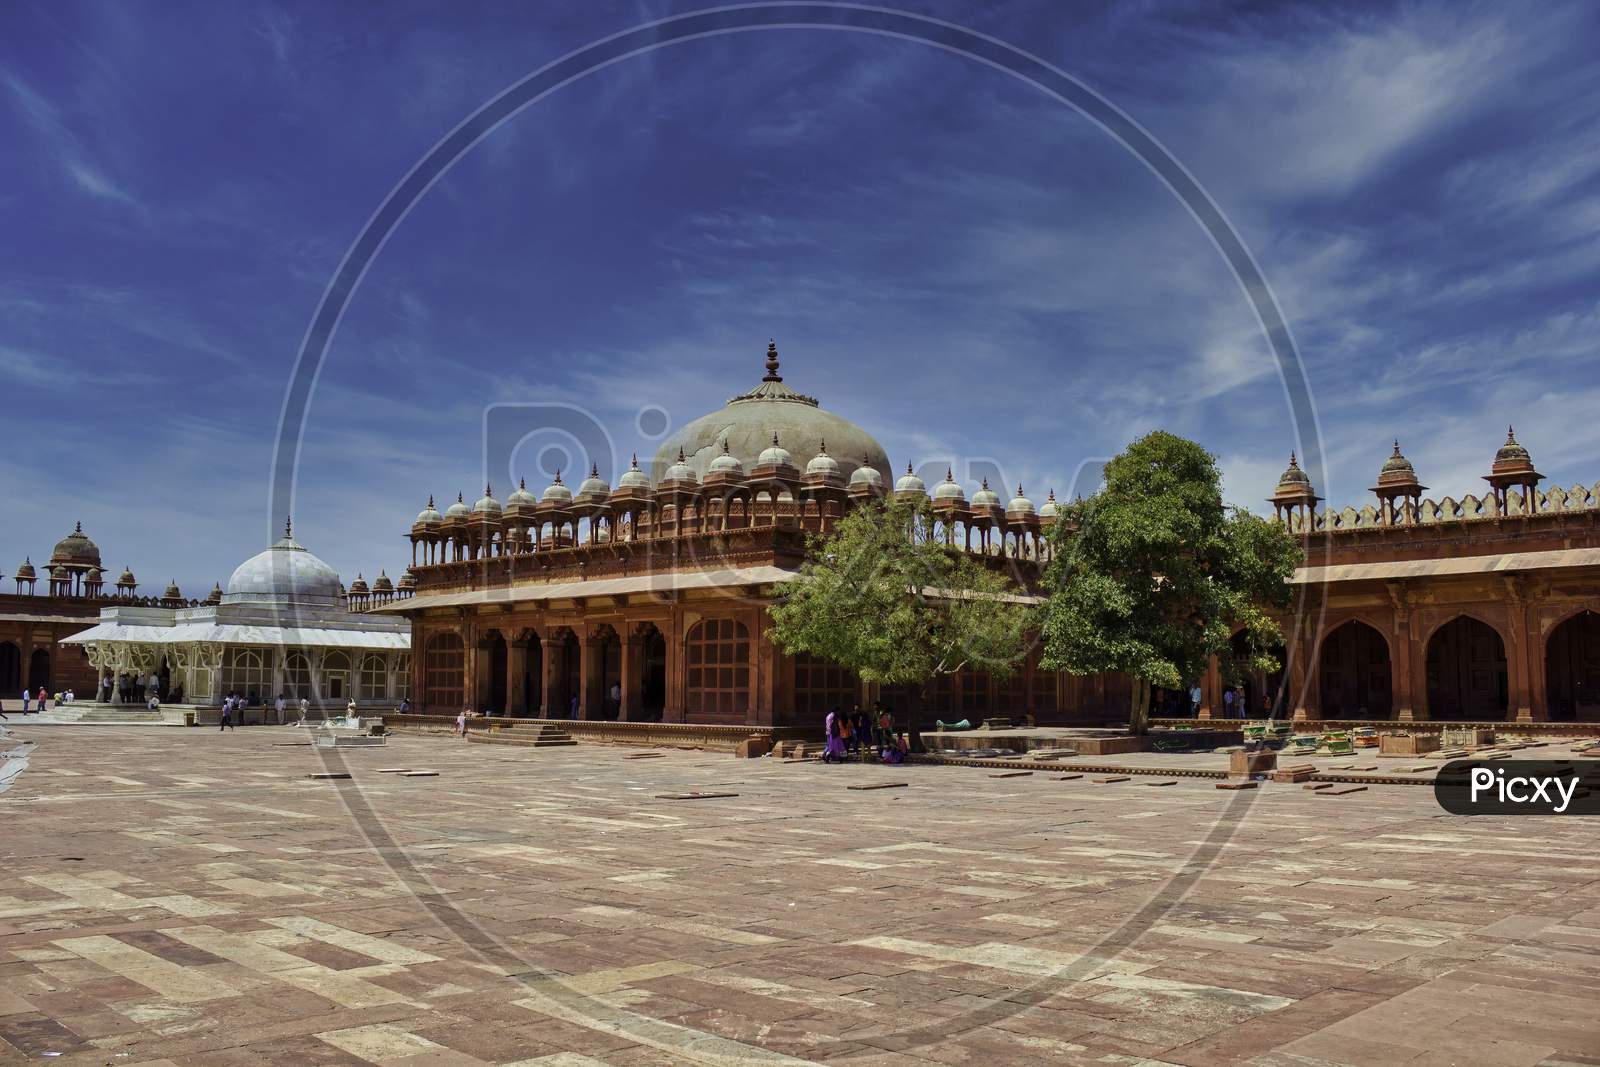 Agra, India - April 10,2014: Fatehpur Sikri A Small City In Northern India In The West Of Agra, Founded By Mughal Emperor. Red Sandstone Buildings Cluster At Its Center. Buland Darwaza Gate Is The Entrance To Jama Masjid Mosque.